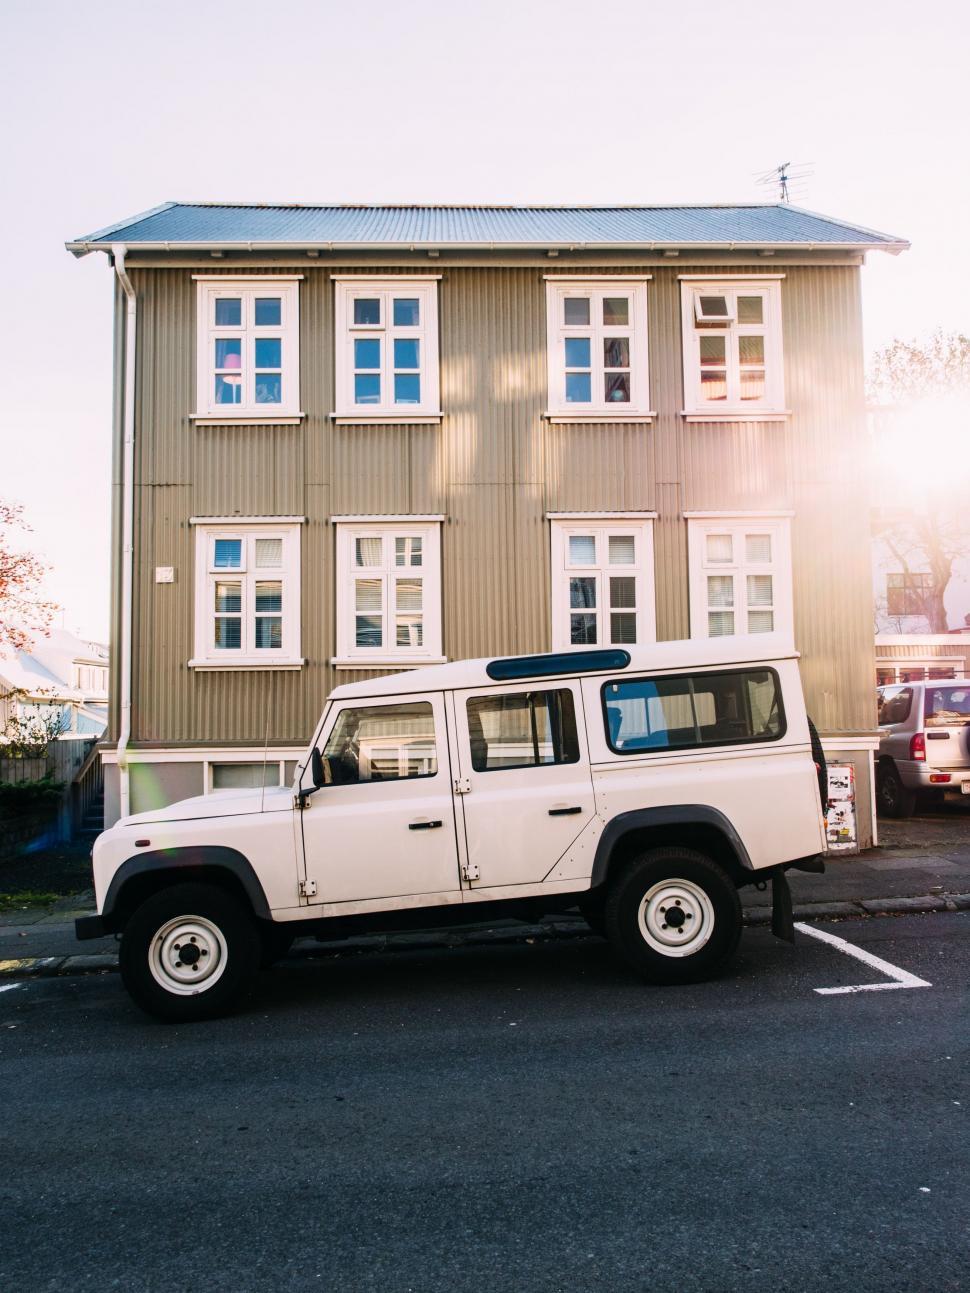 Free Image of White Jeep Parked in Front of Building 